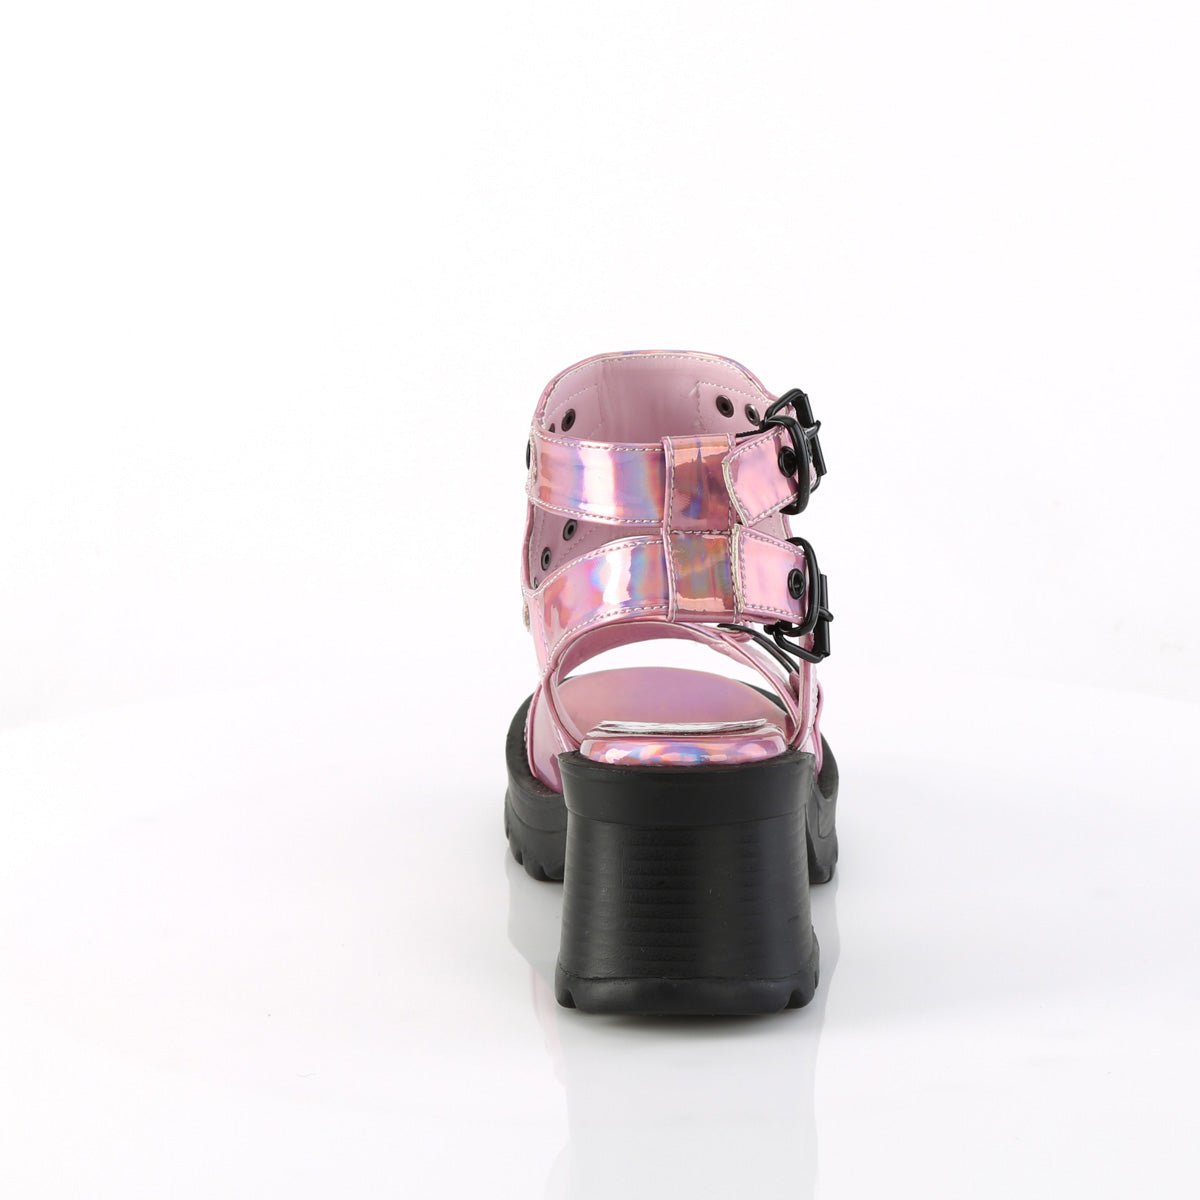 Too Fast | Demonia BRATTY-07 | Pink Holographic Patent Leather Sandals